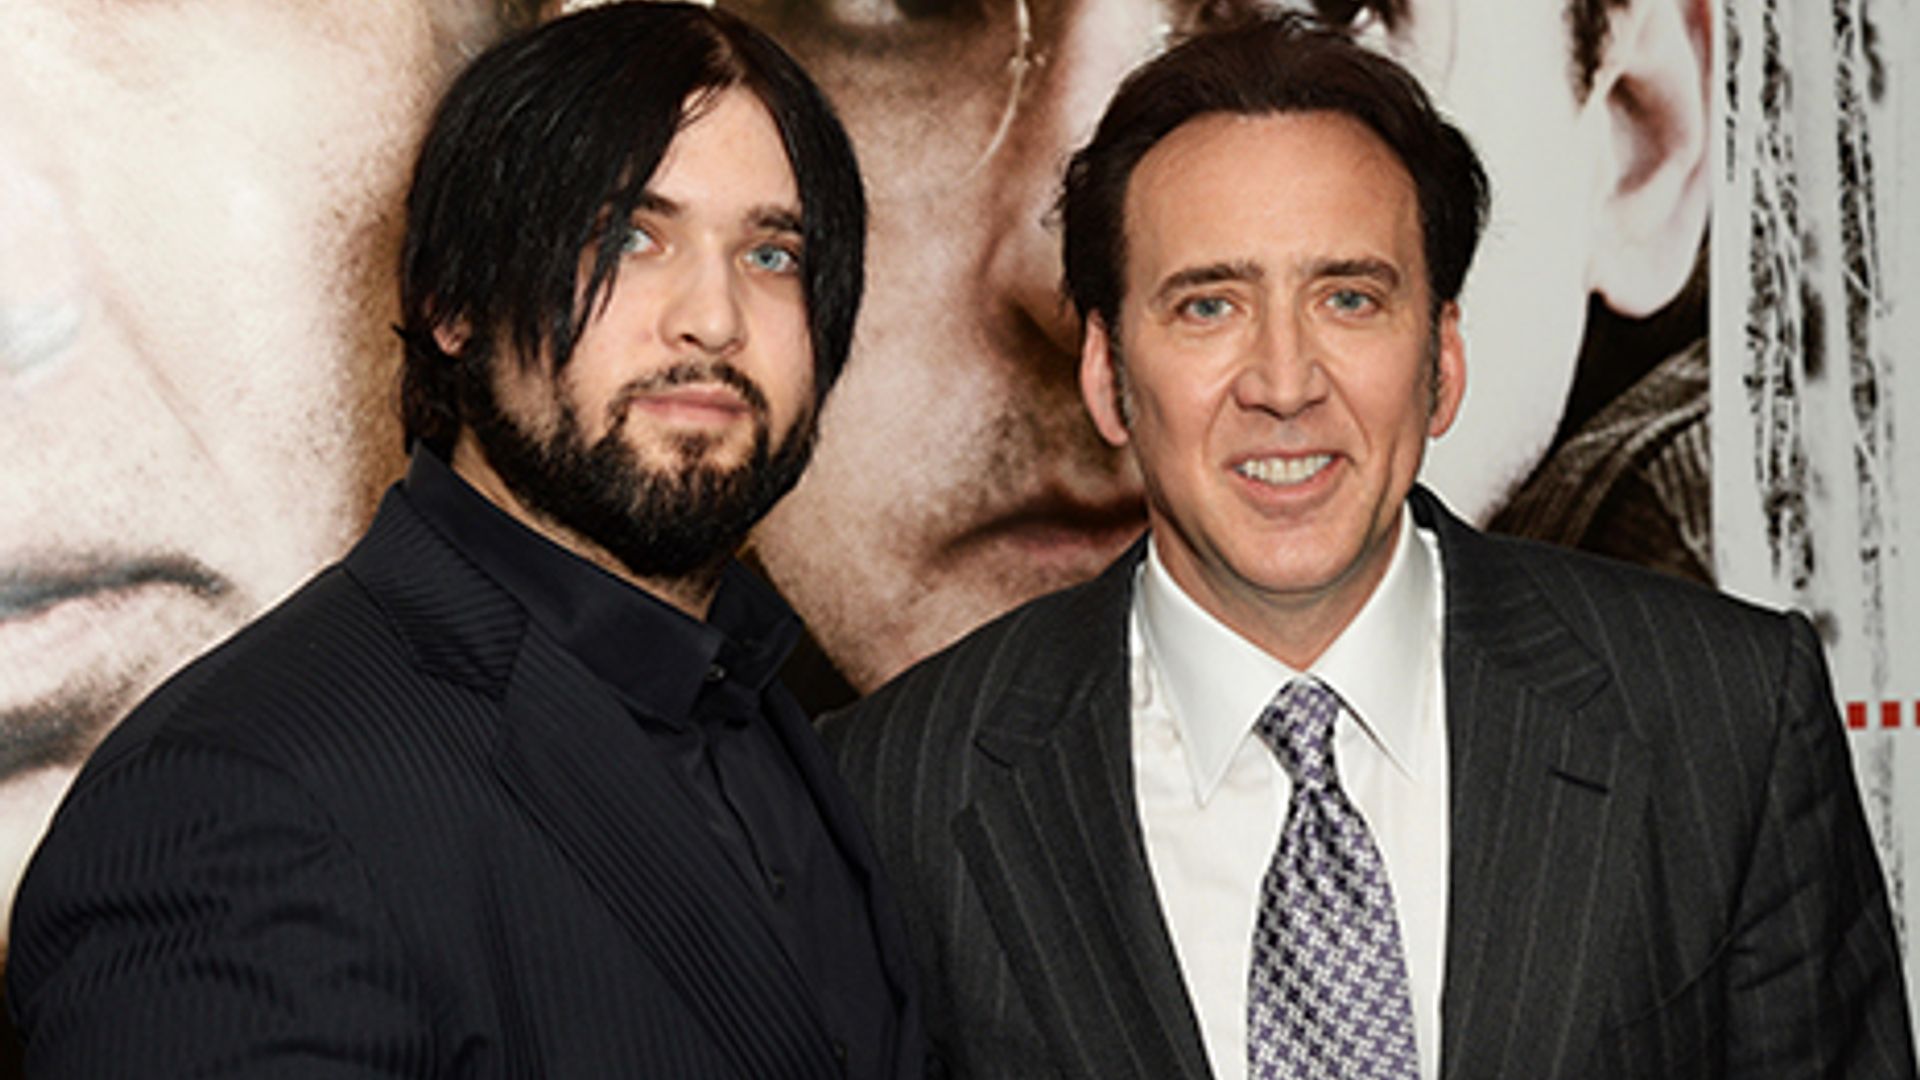 Nicolas Cage’s son Weston accused of beating his mother Christina Fulton